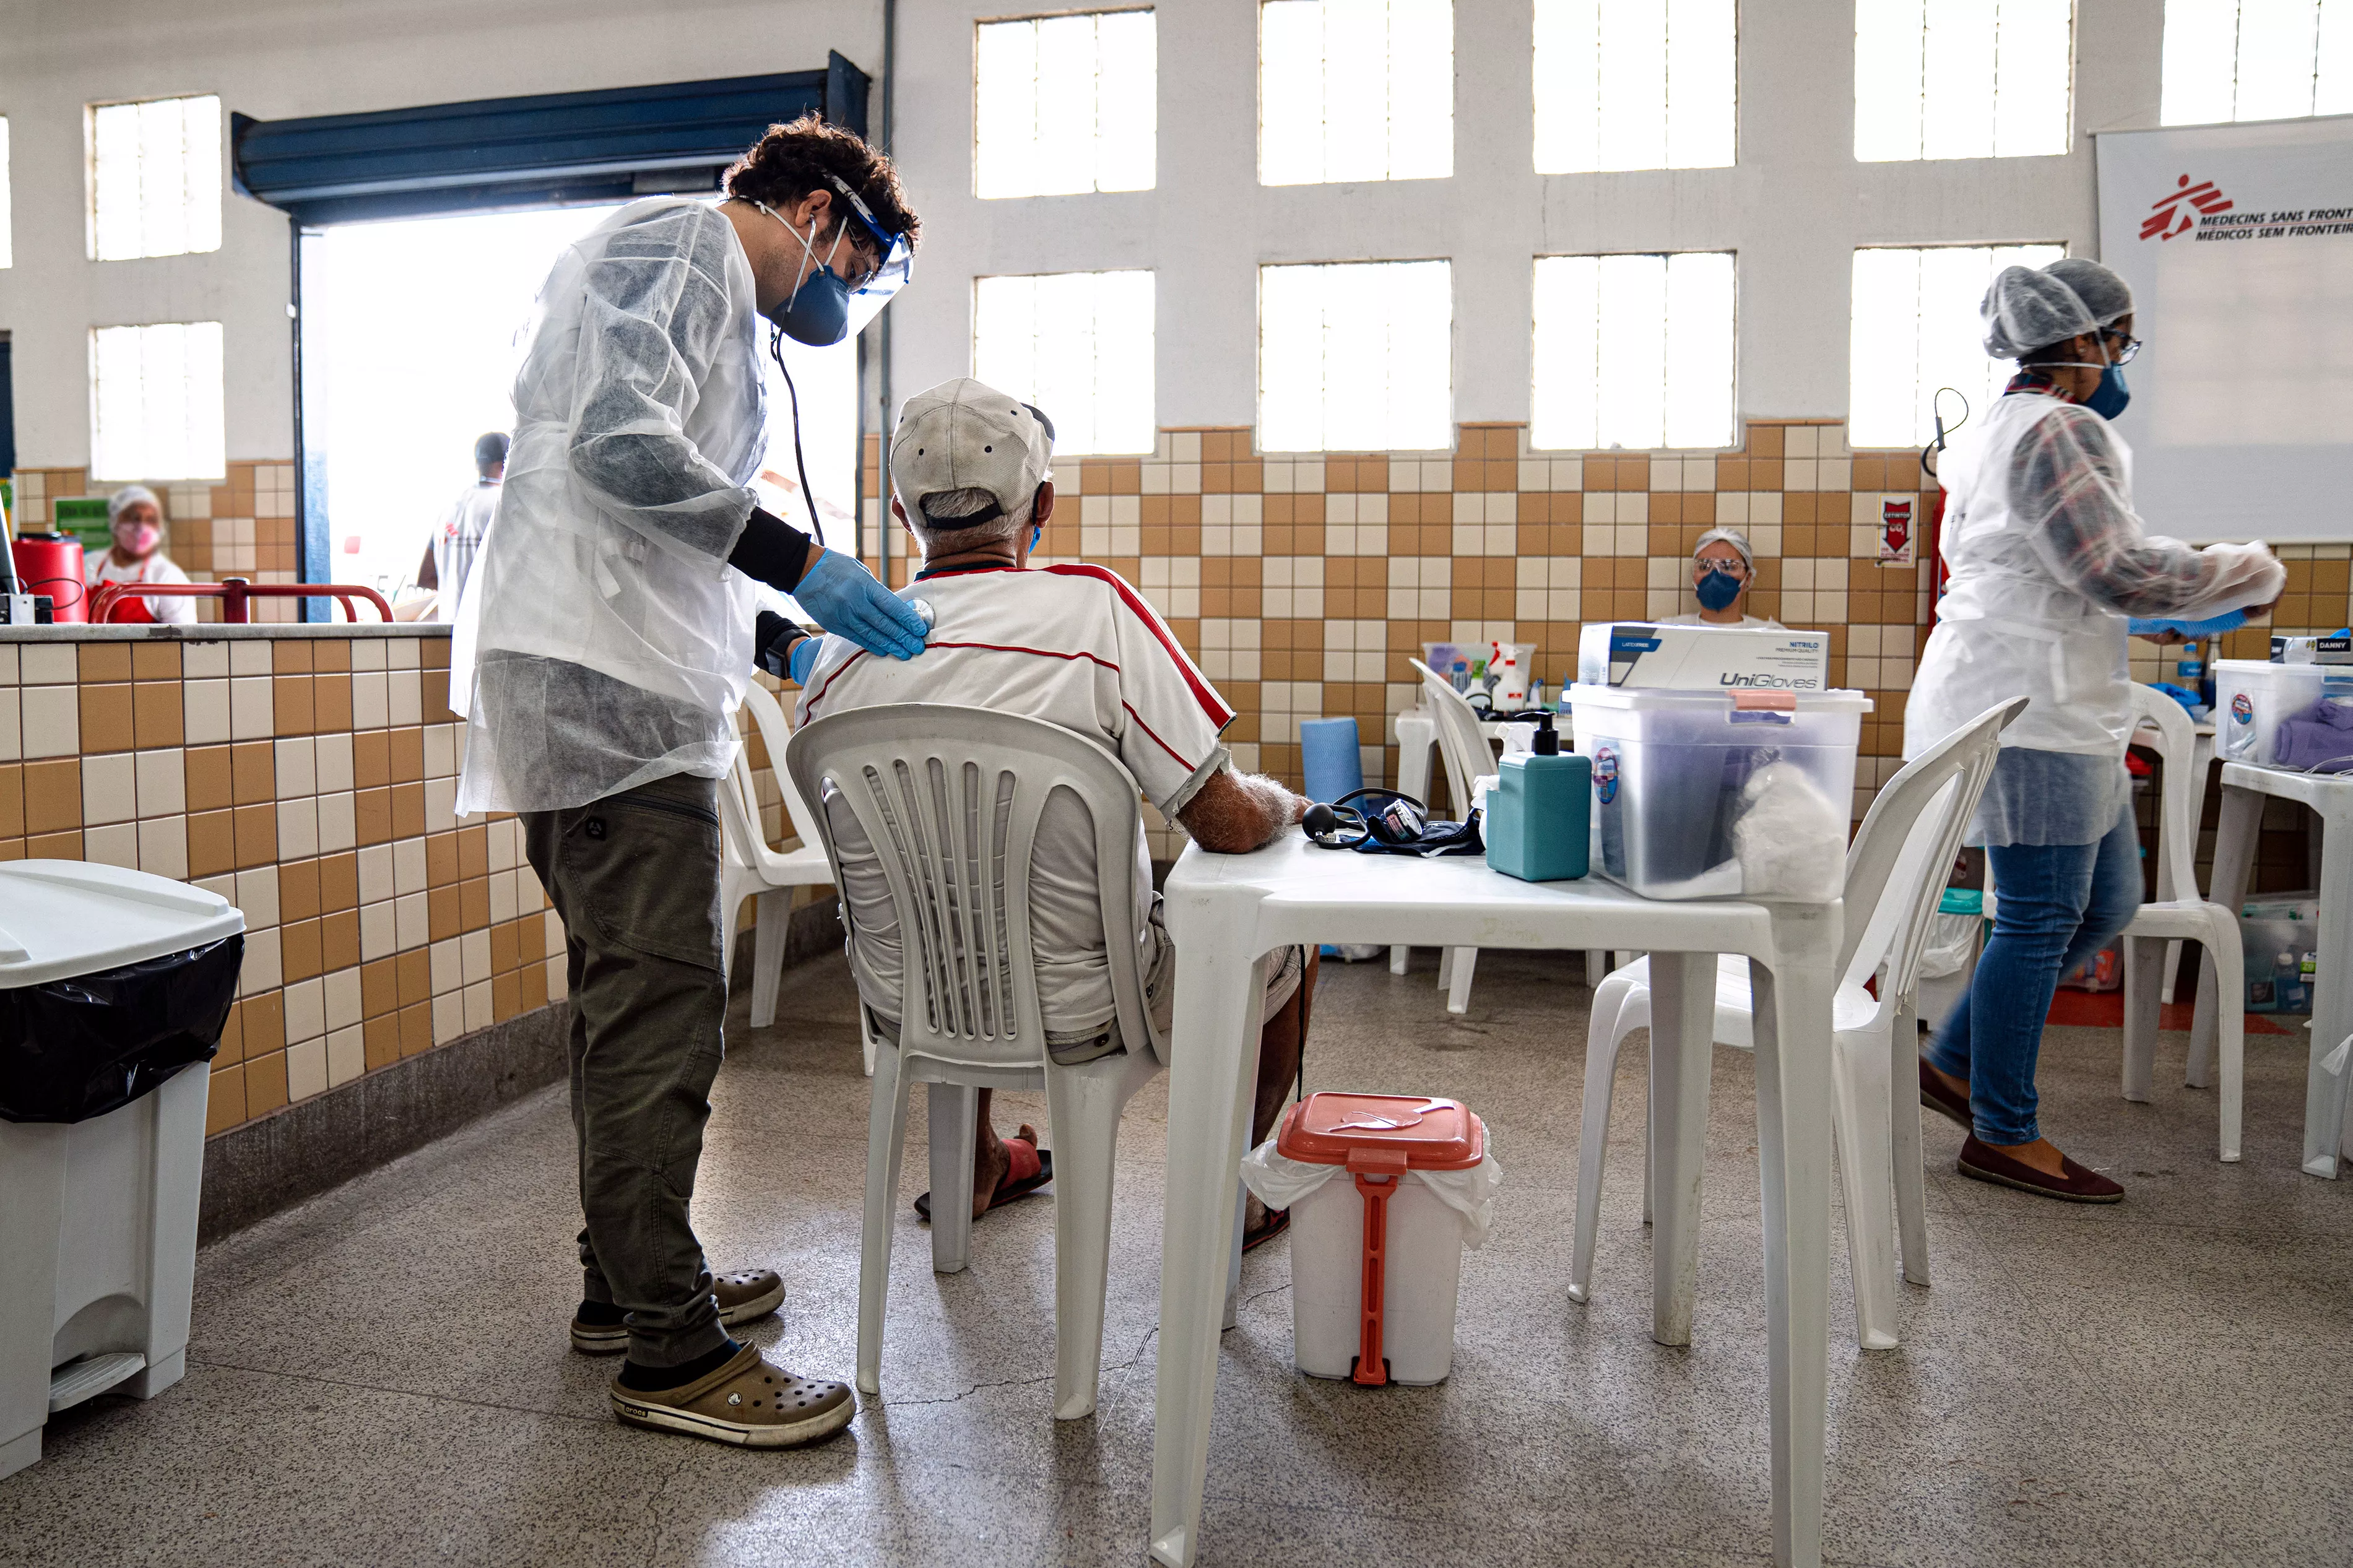 In addition to mobile clinics targeting people living in homelessness, in partnership with the city of Rio de Janeiro, MSF conducted health promotion, screening and medical care activities at a low-cost restaurant in Bonsucesso.